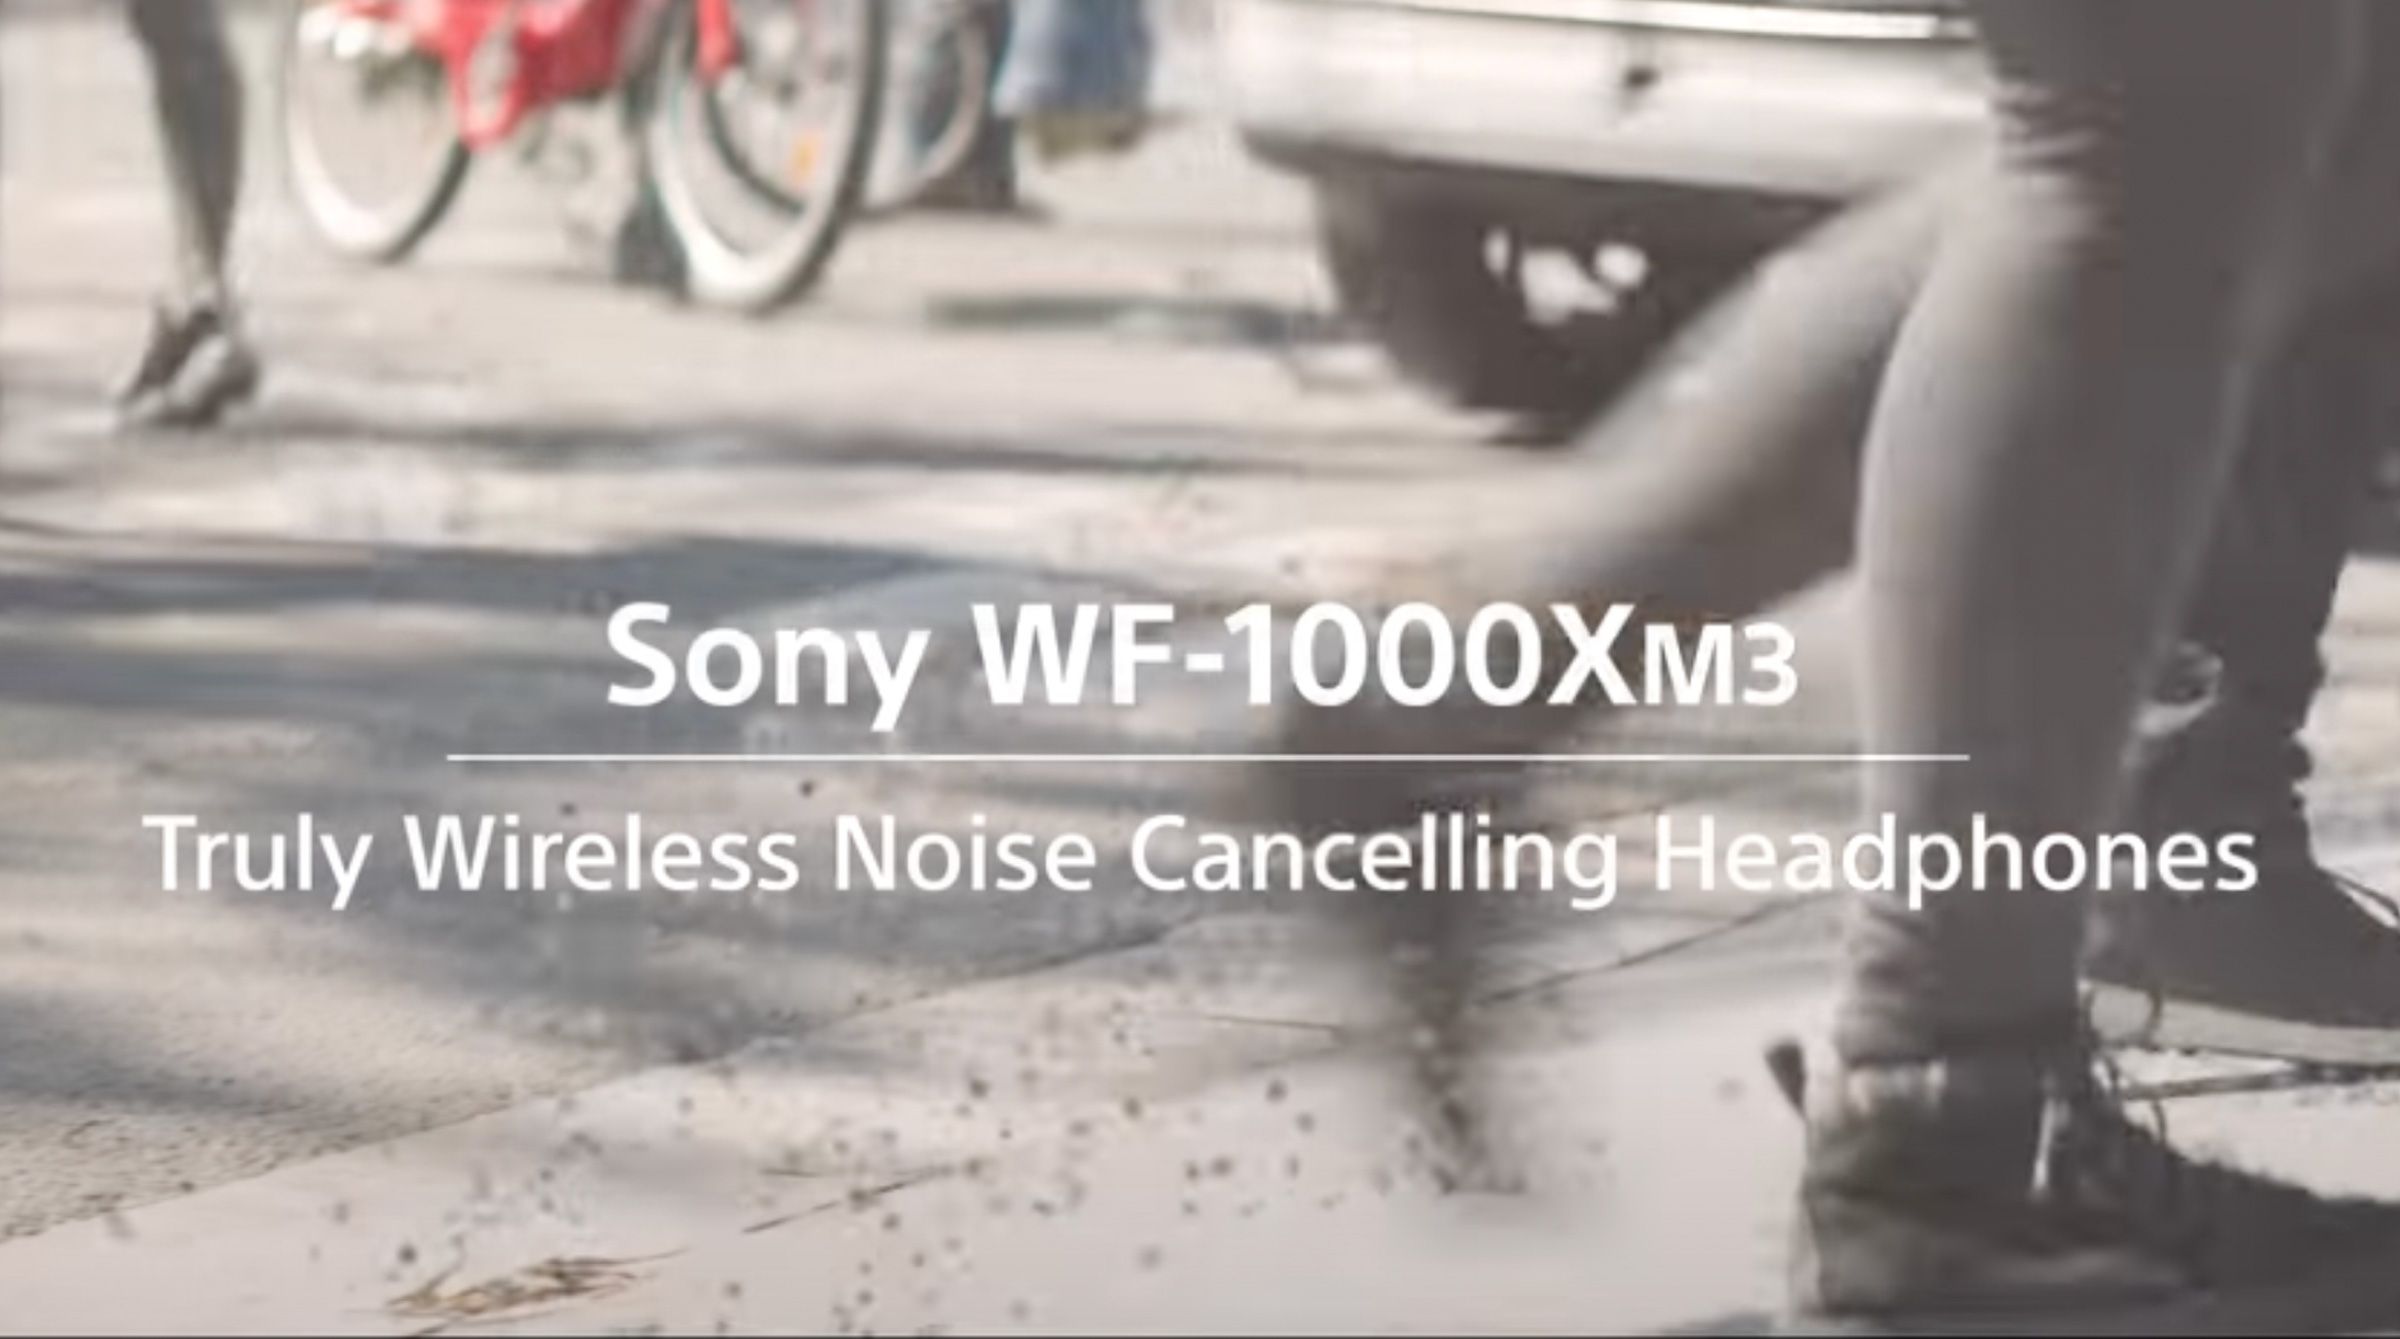 Sony Noise Cancelling Headphones WF-1000XM3 Official Product Video